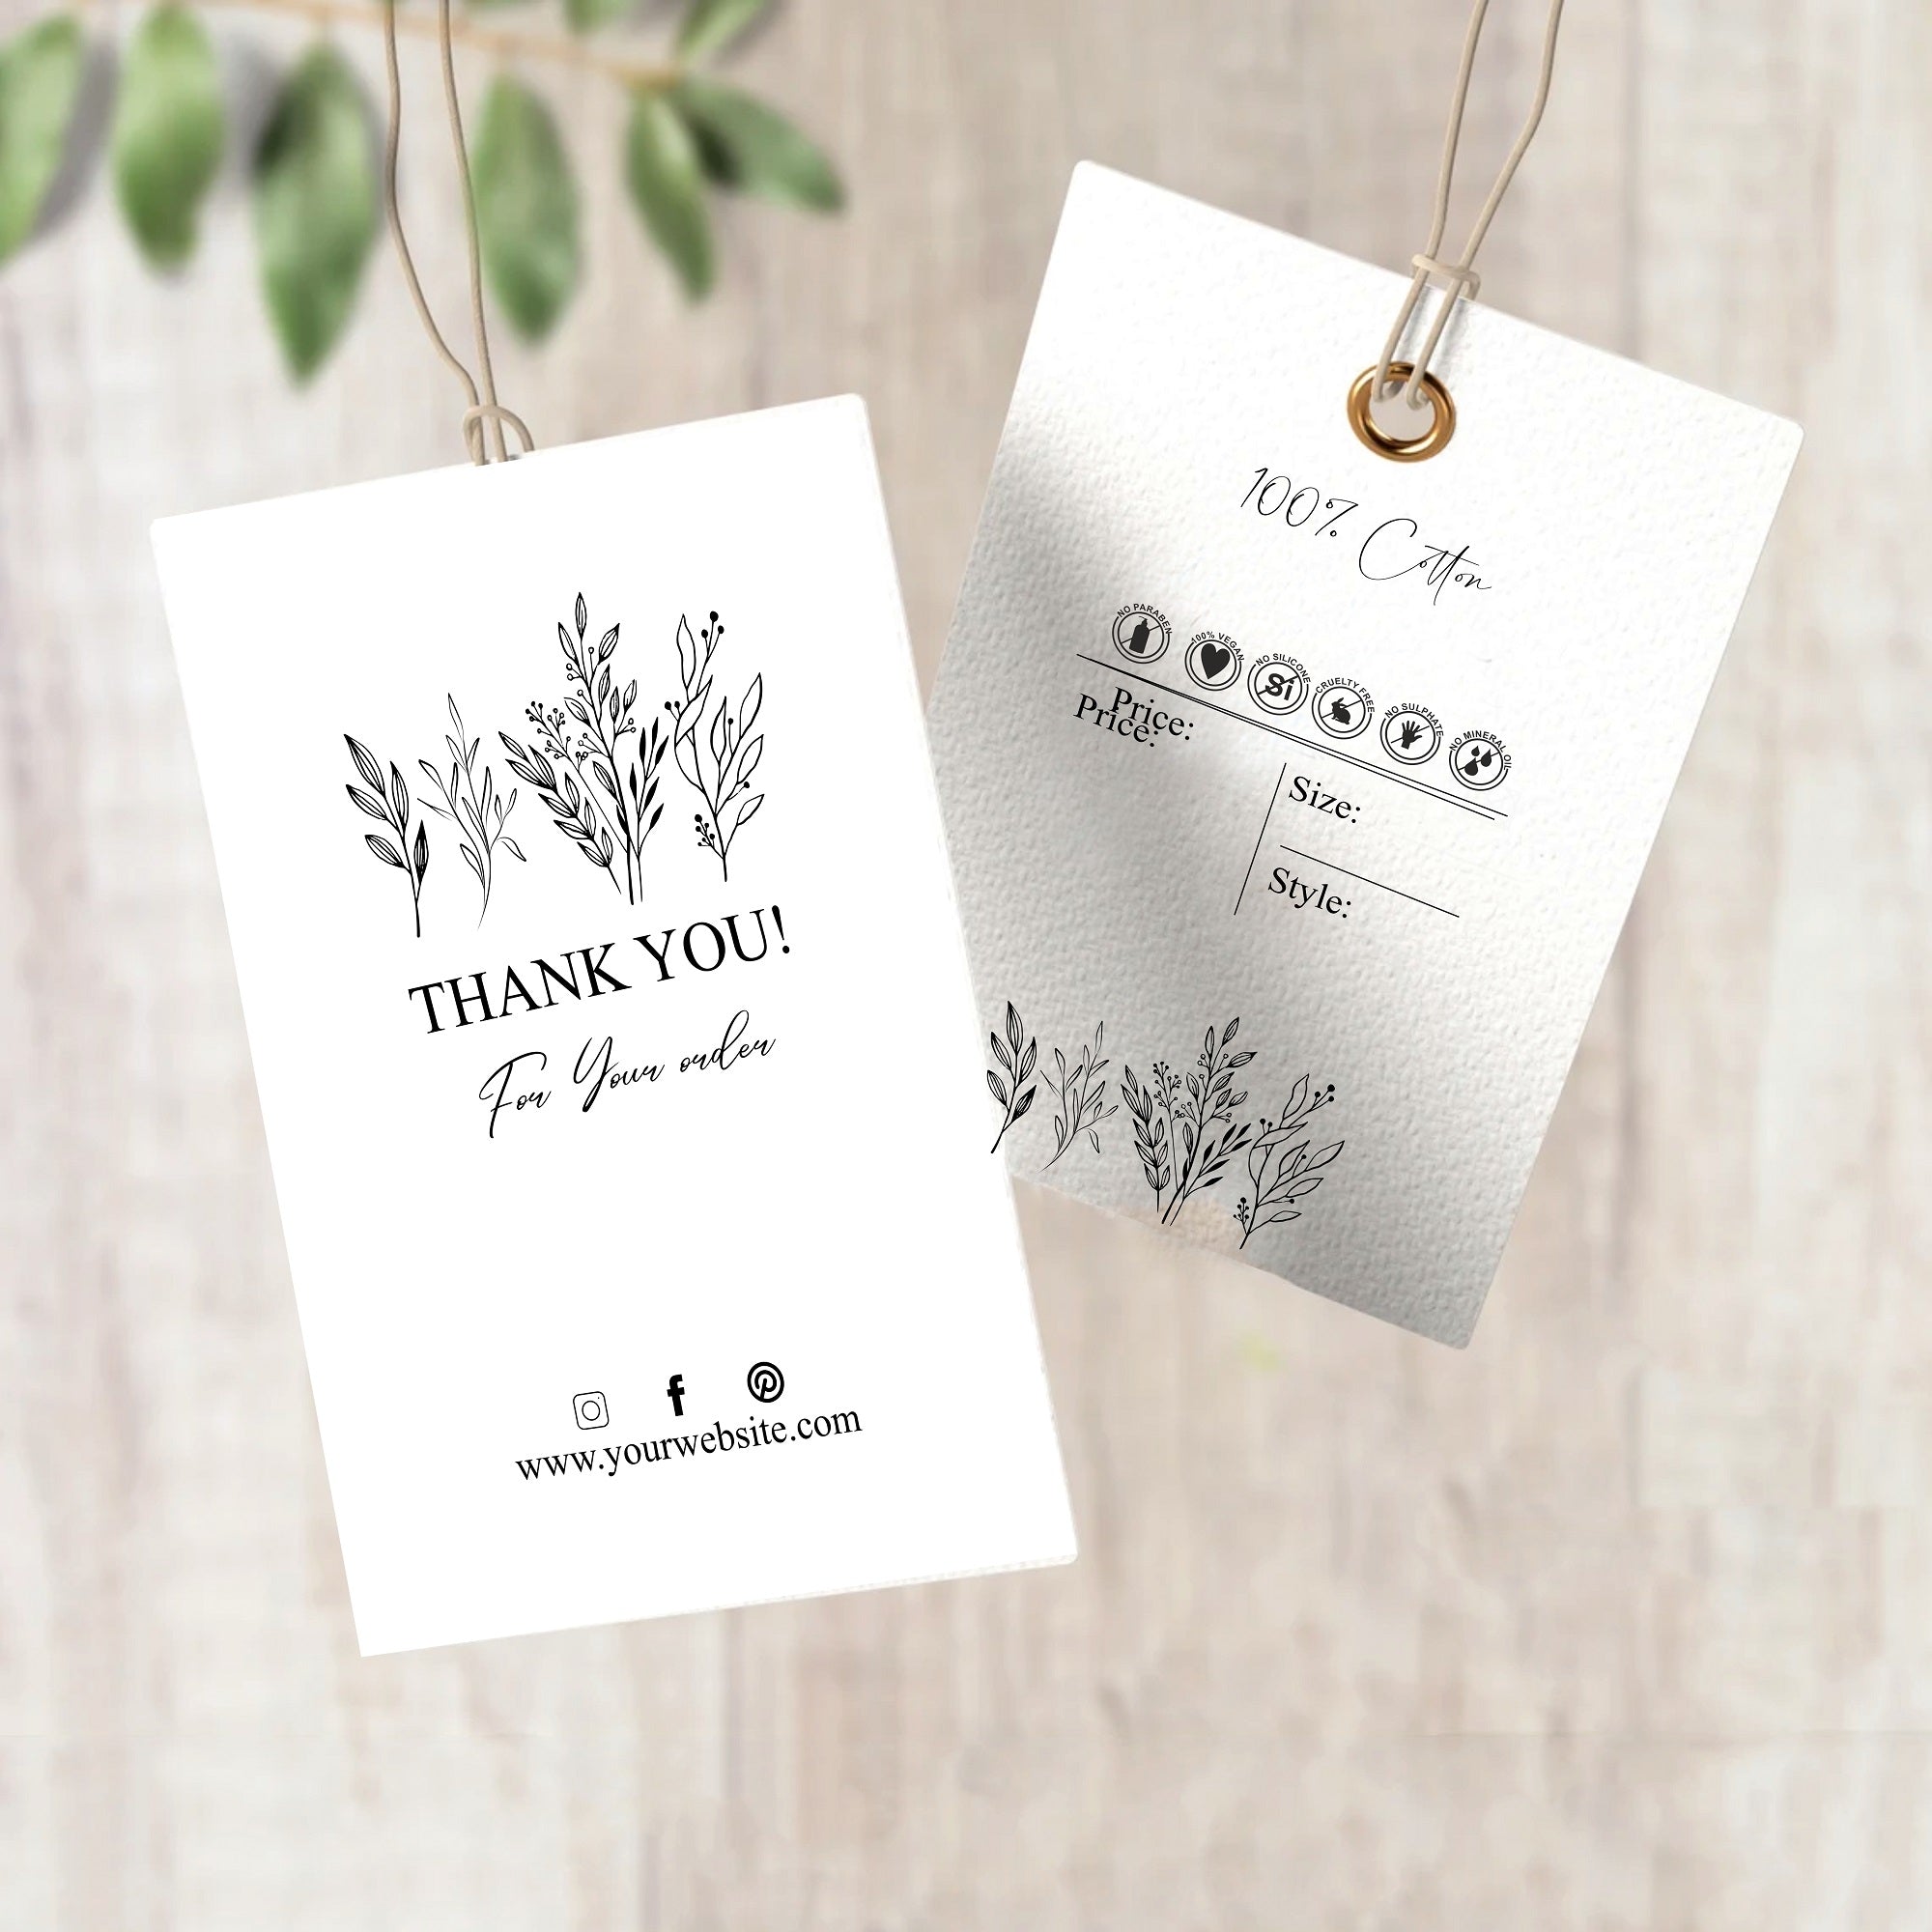 Premium White Thank you card editable template / Printable / instant download / Canva / PNG / PDF / Free Size thank you business card.